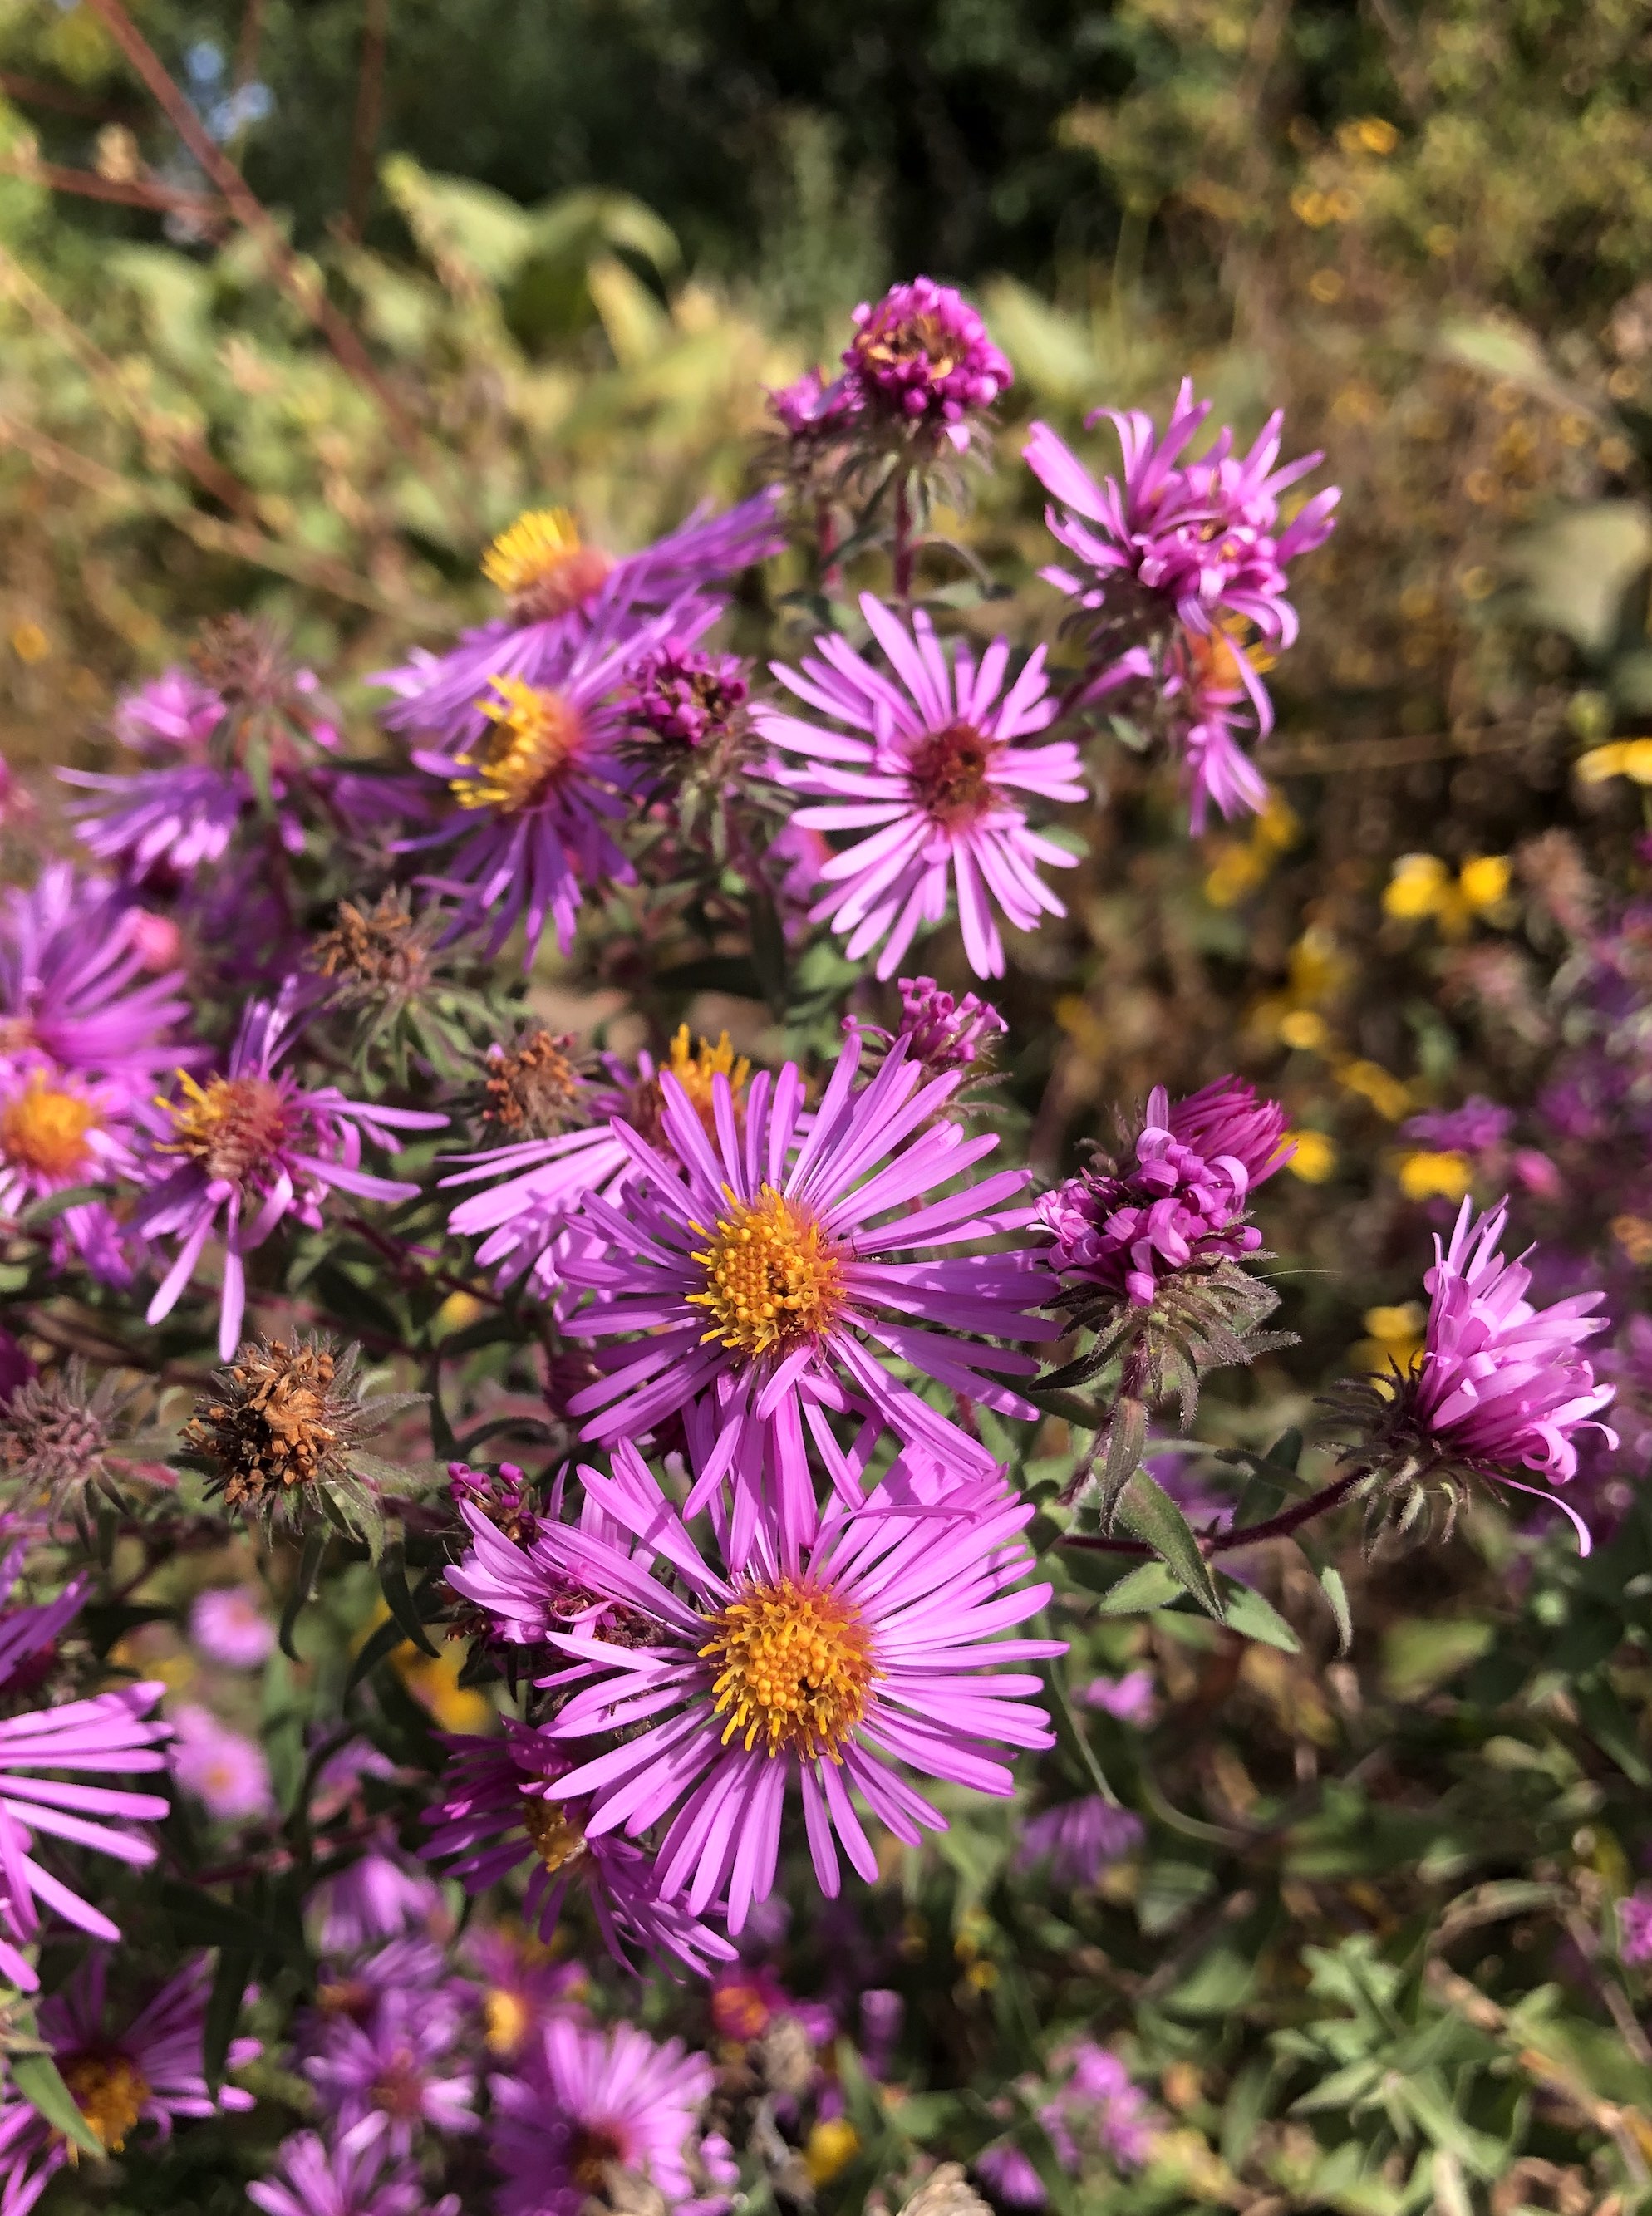 New England Aster along bike path between Midvales Blvd and Beltline in Madison, Wisconsin on October 4, 2022.